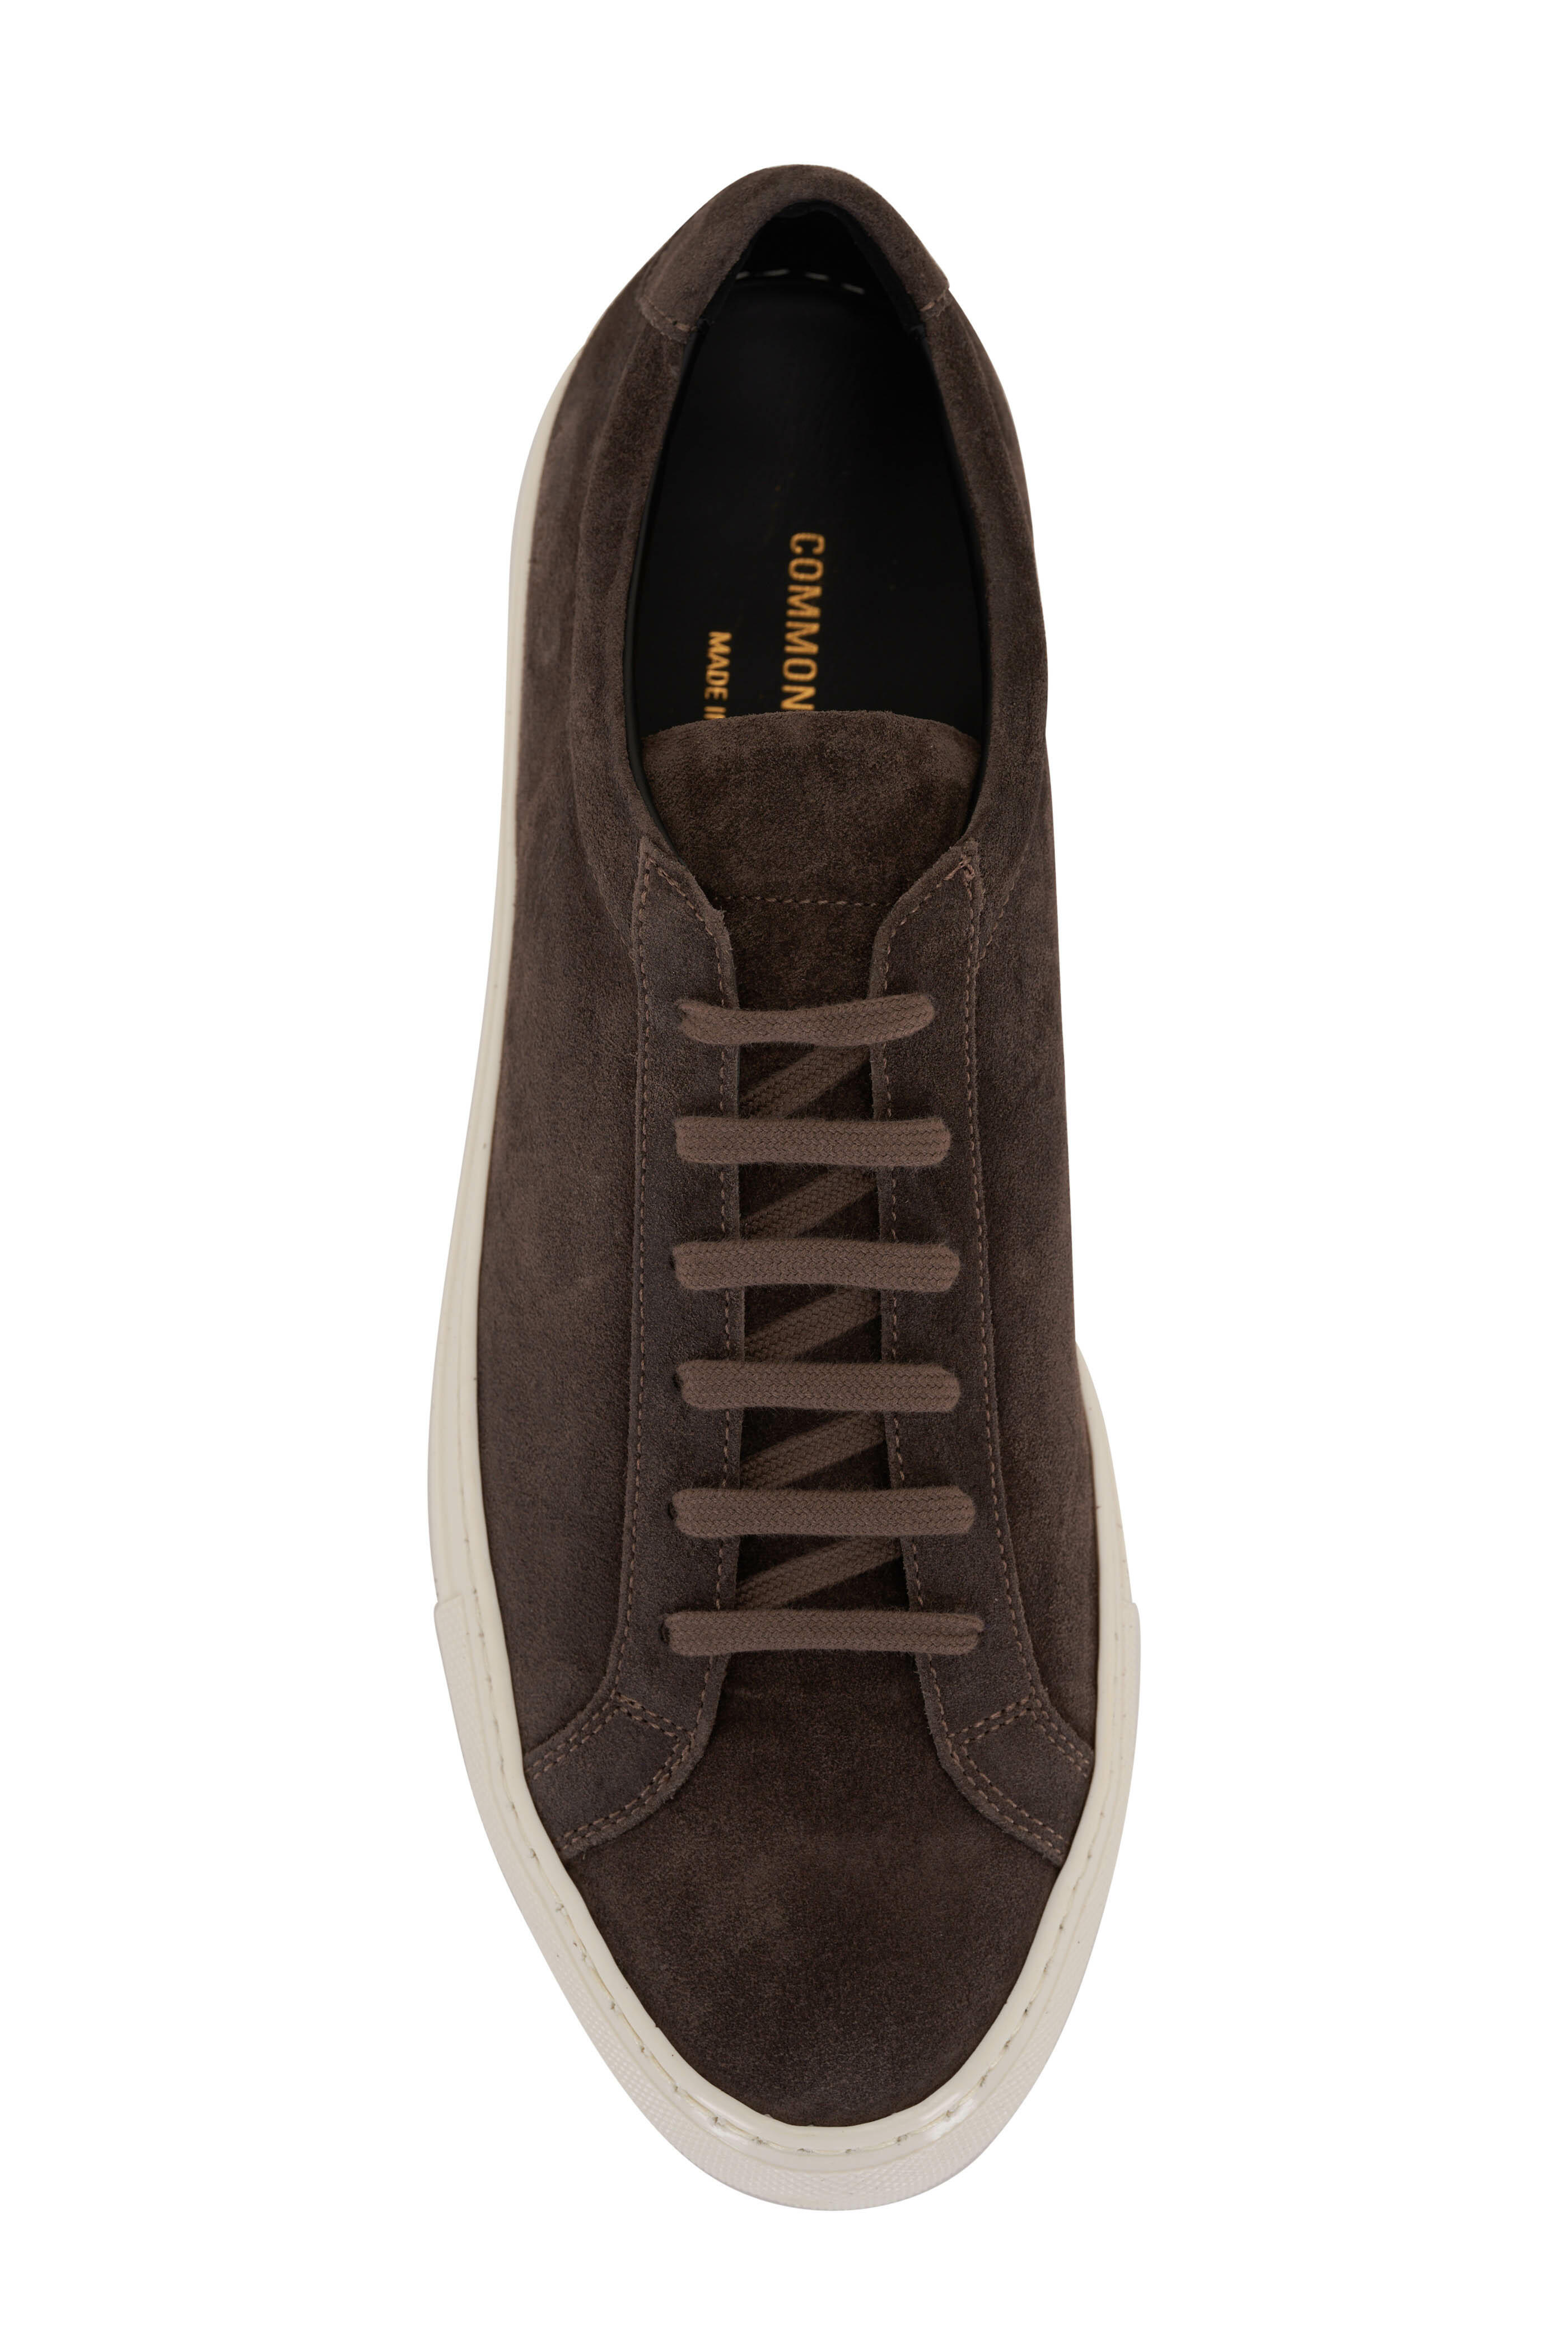 Common Projects - Achilles Waxed Gray Suede Low-Top Sneaker